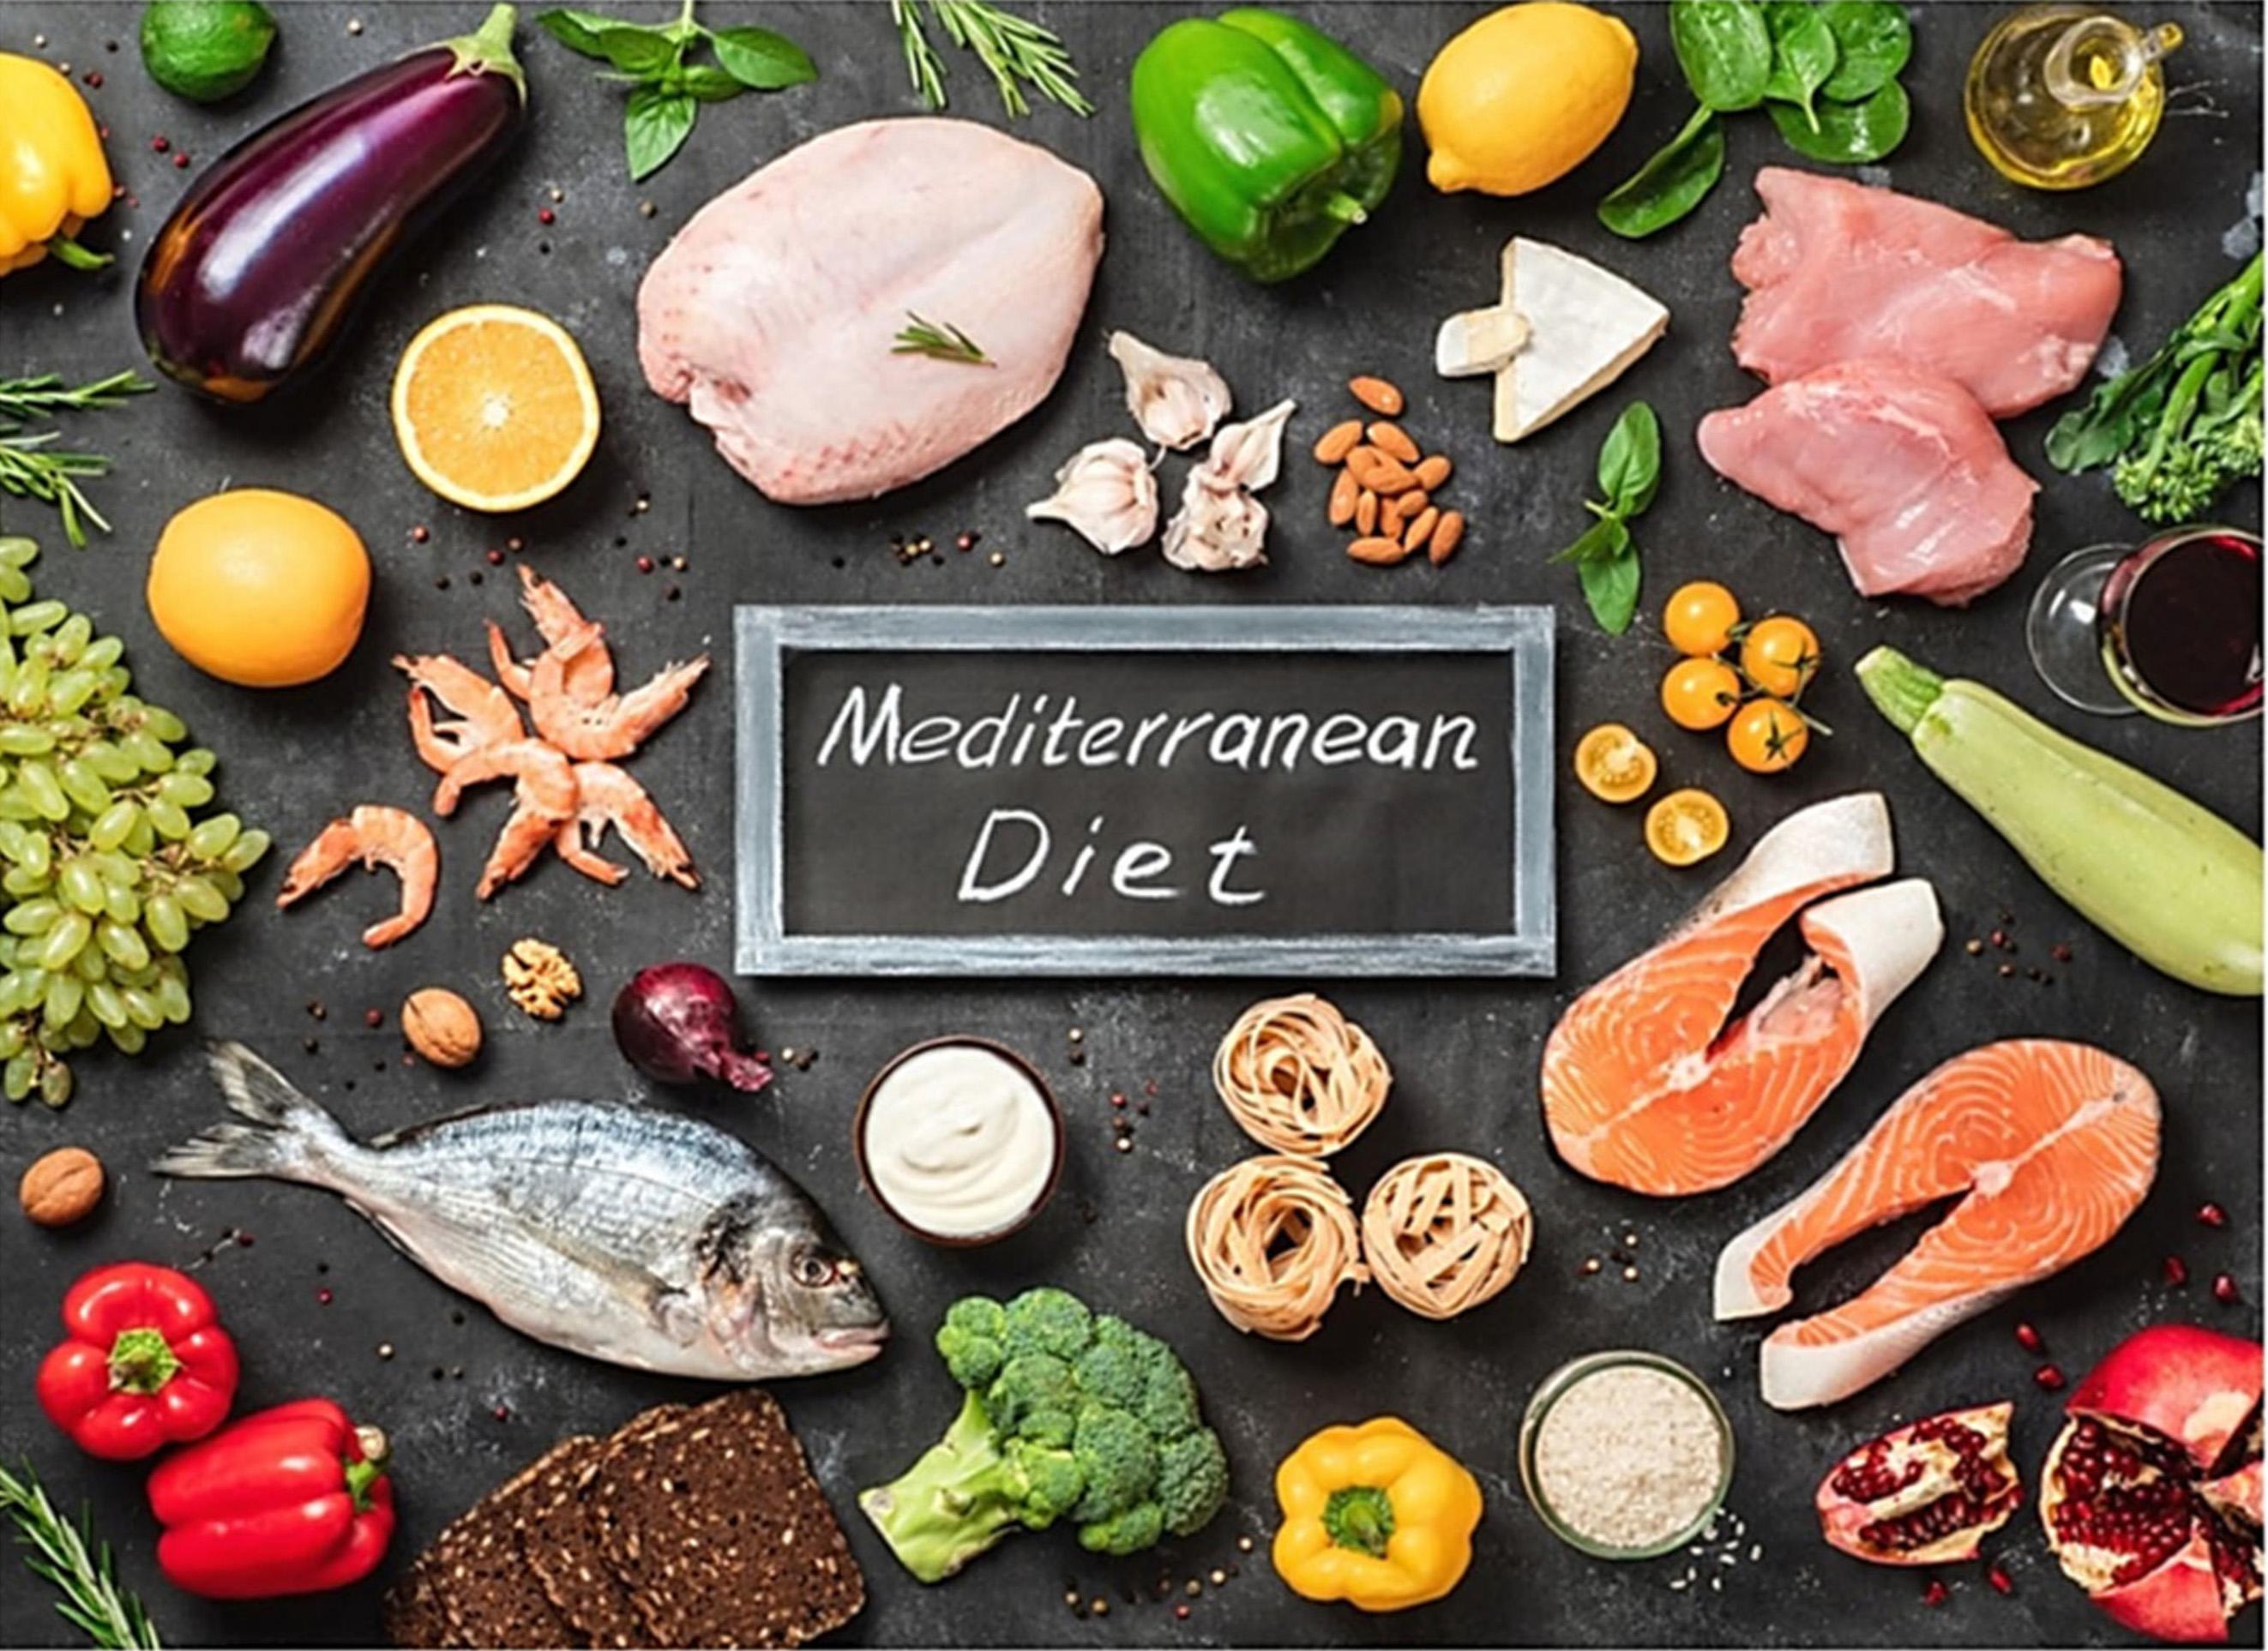 foods that are included in the Mediterranean diet plan